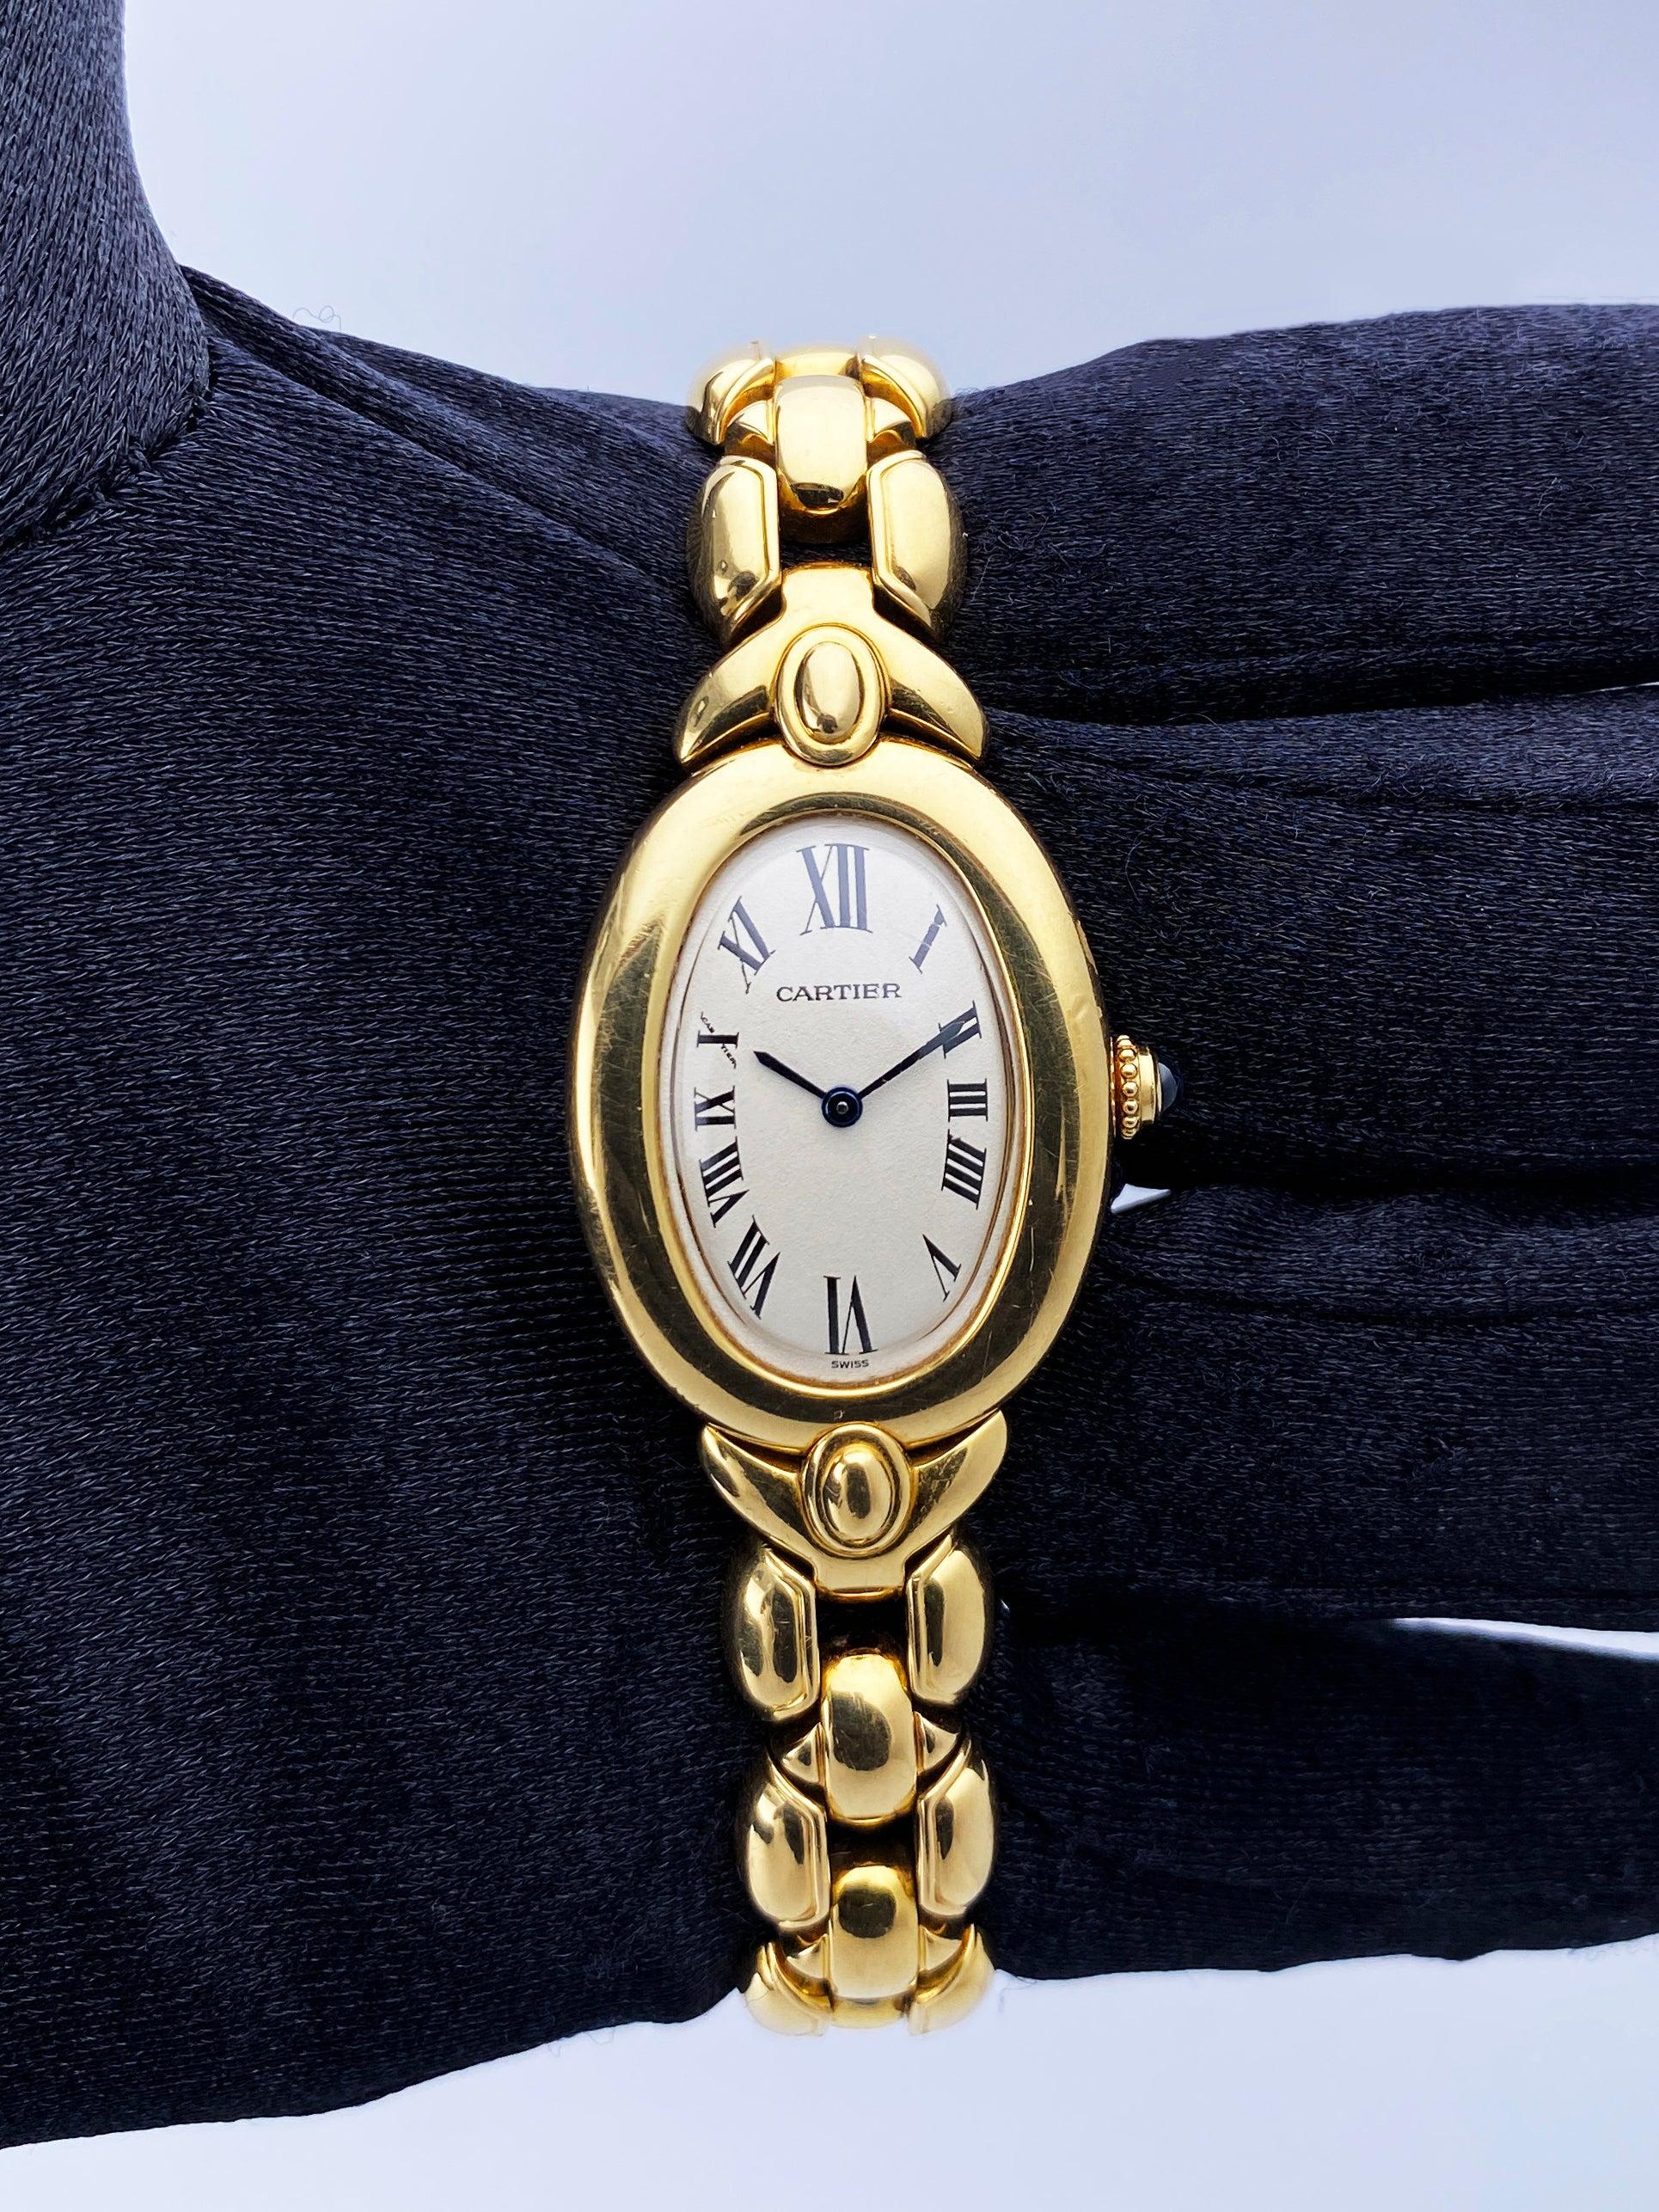 Cartier Baignoire 2311 Ladies Watch. 23mm 18K yellow gold case with 18K yellow gold bezel. Off-white dial with blue hands and black Roman numeral hour markers. 18K yellow gold bracelet with hidden butterfly clasp. Will fit up to 6-inch wrist.